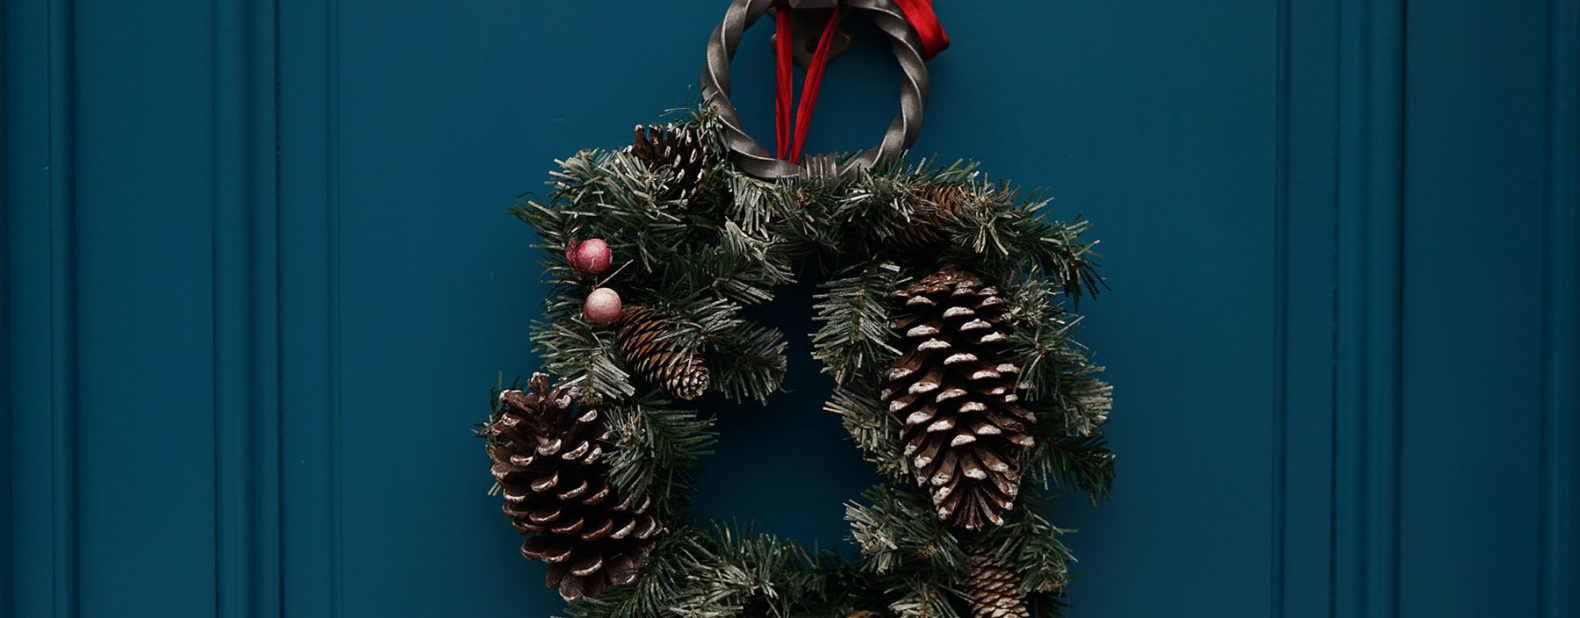 holiday wreath - improve holiday sales